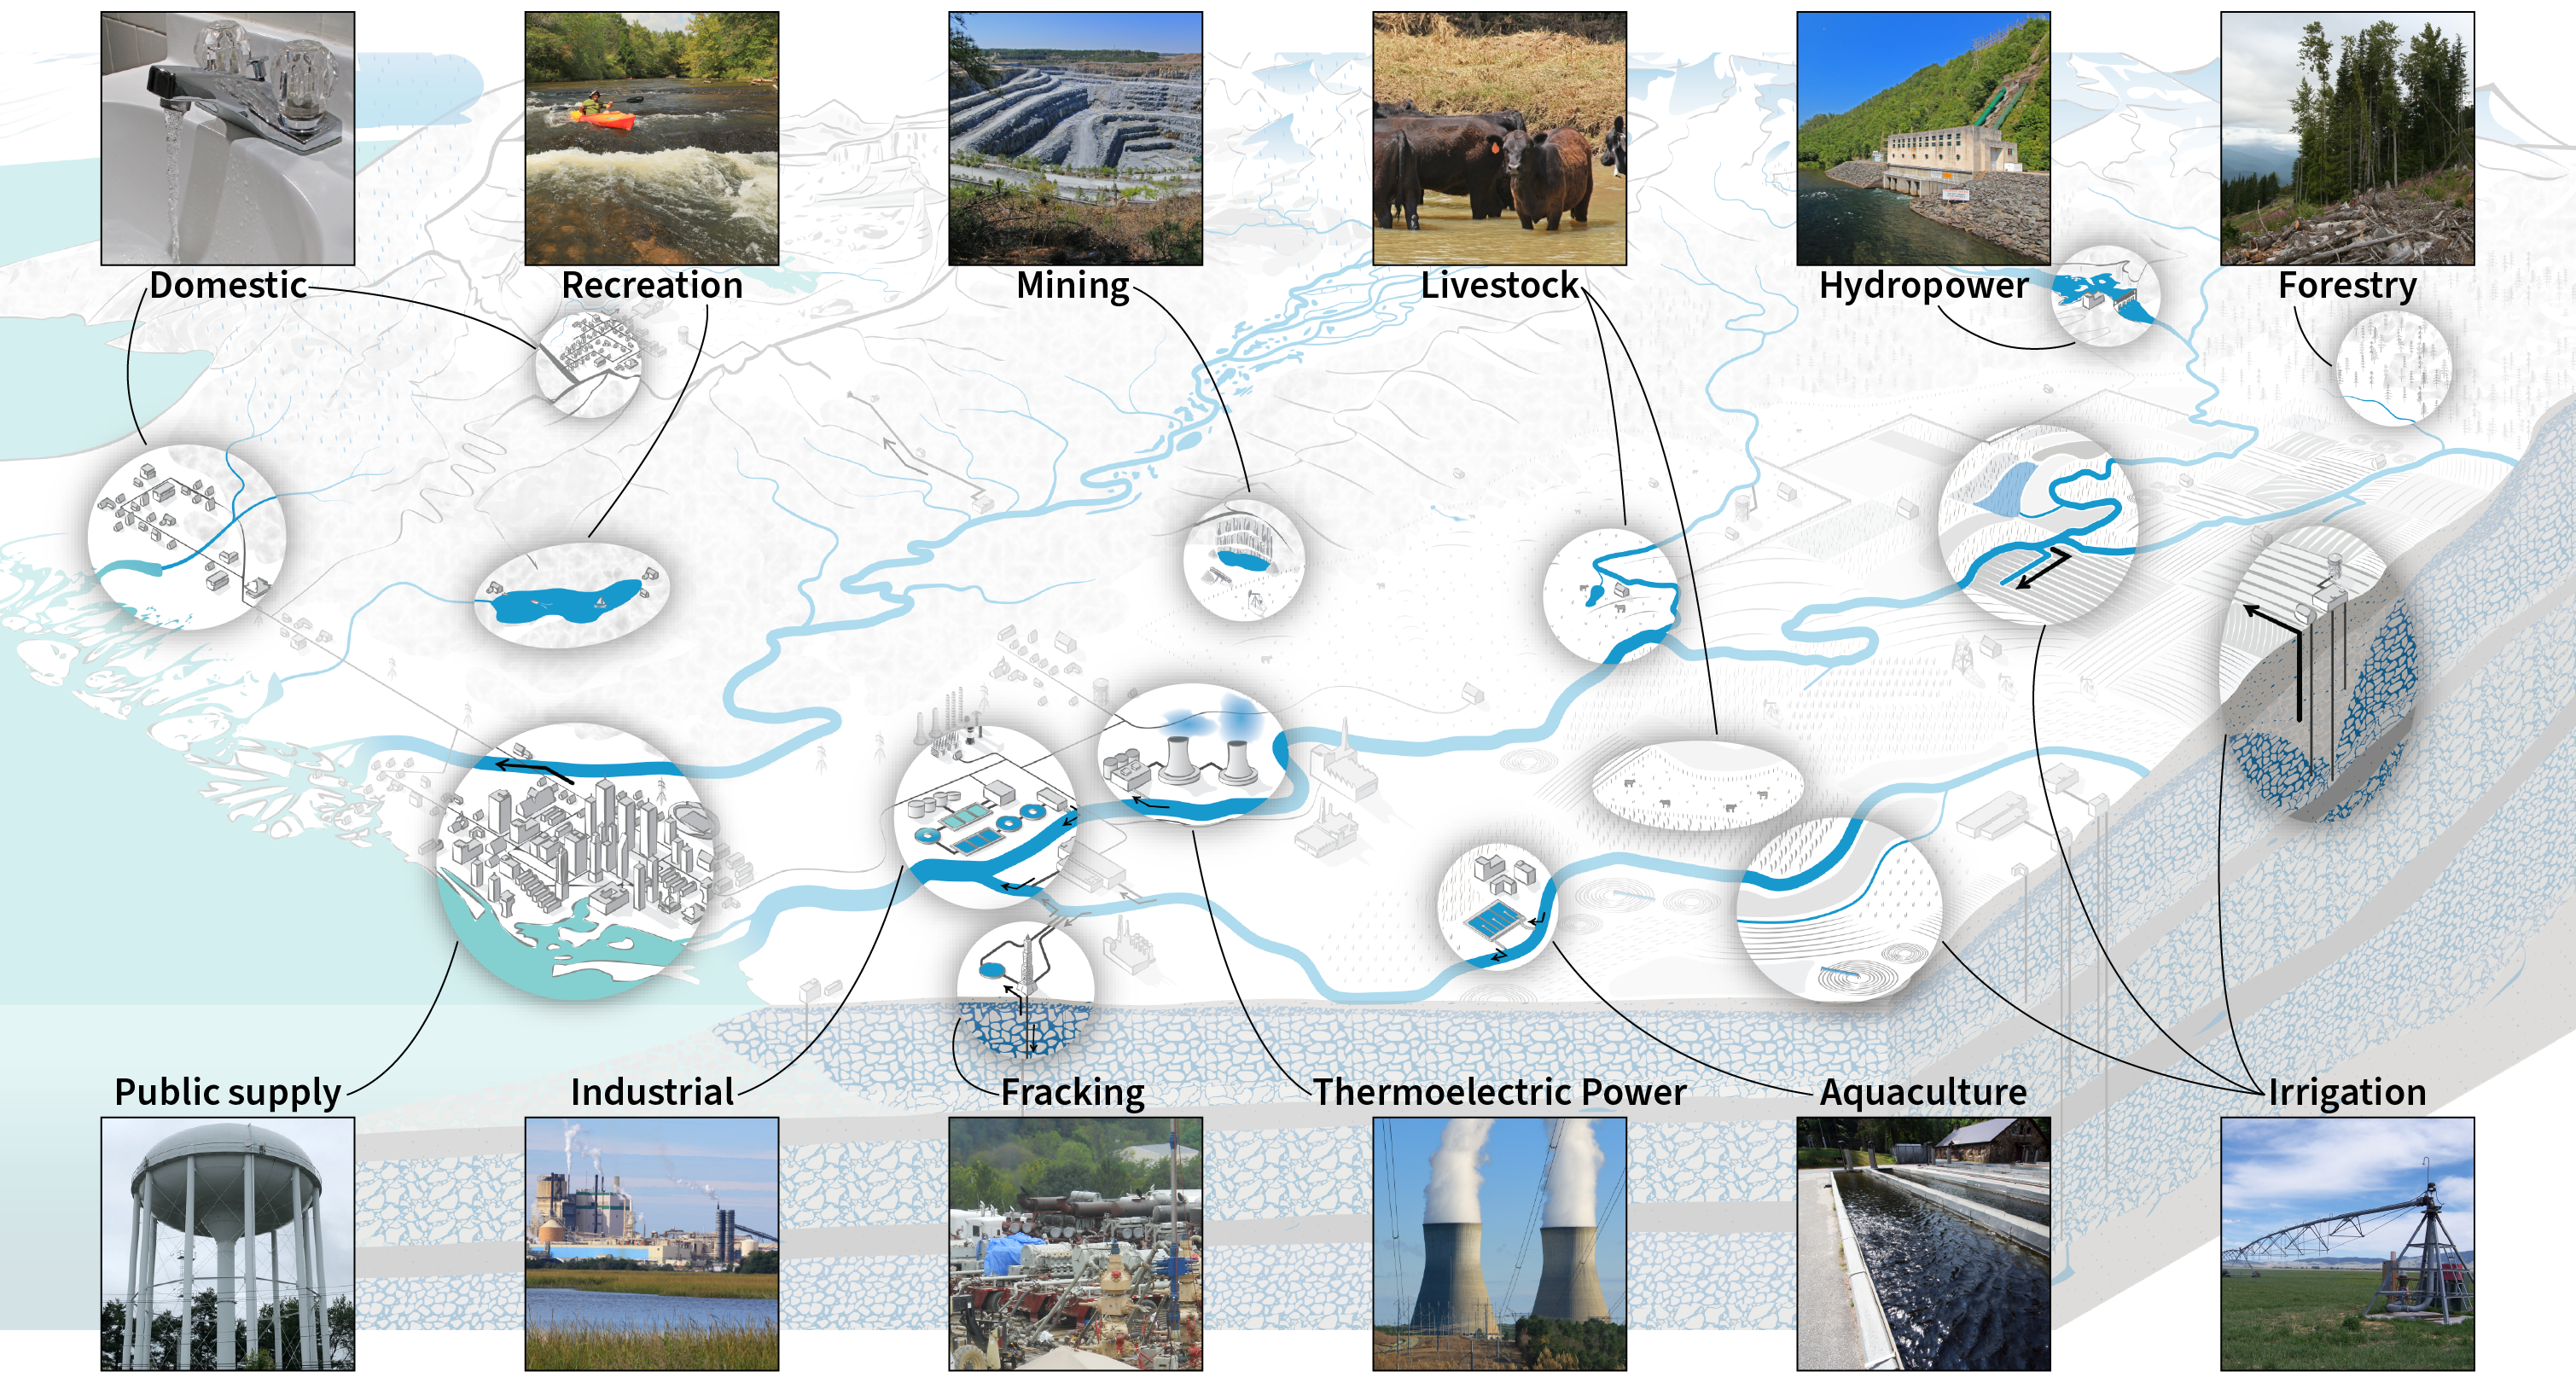 A graphic of the new Water Cycle Diagram with real-life images that depict 12 different categories of water use. The real-life images connect to the related elements on the diagram. For example, a photo of industrial farming with the label 'livestock' connects to grazing and agricultural areas of the diagram.